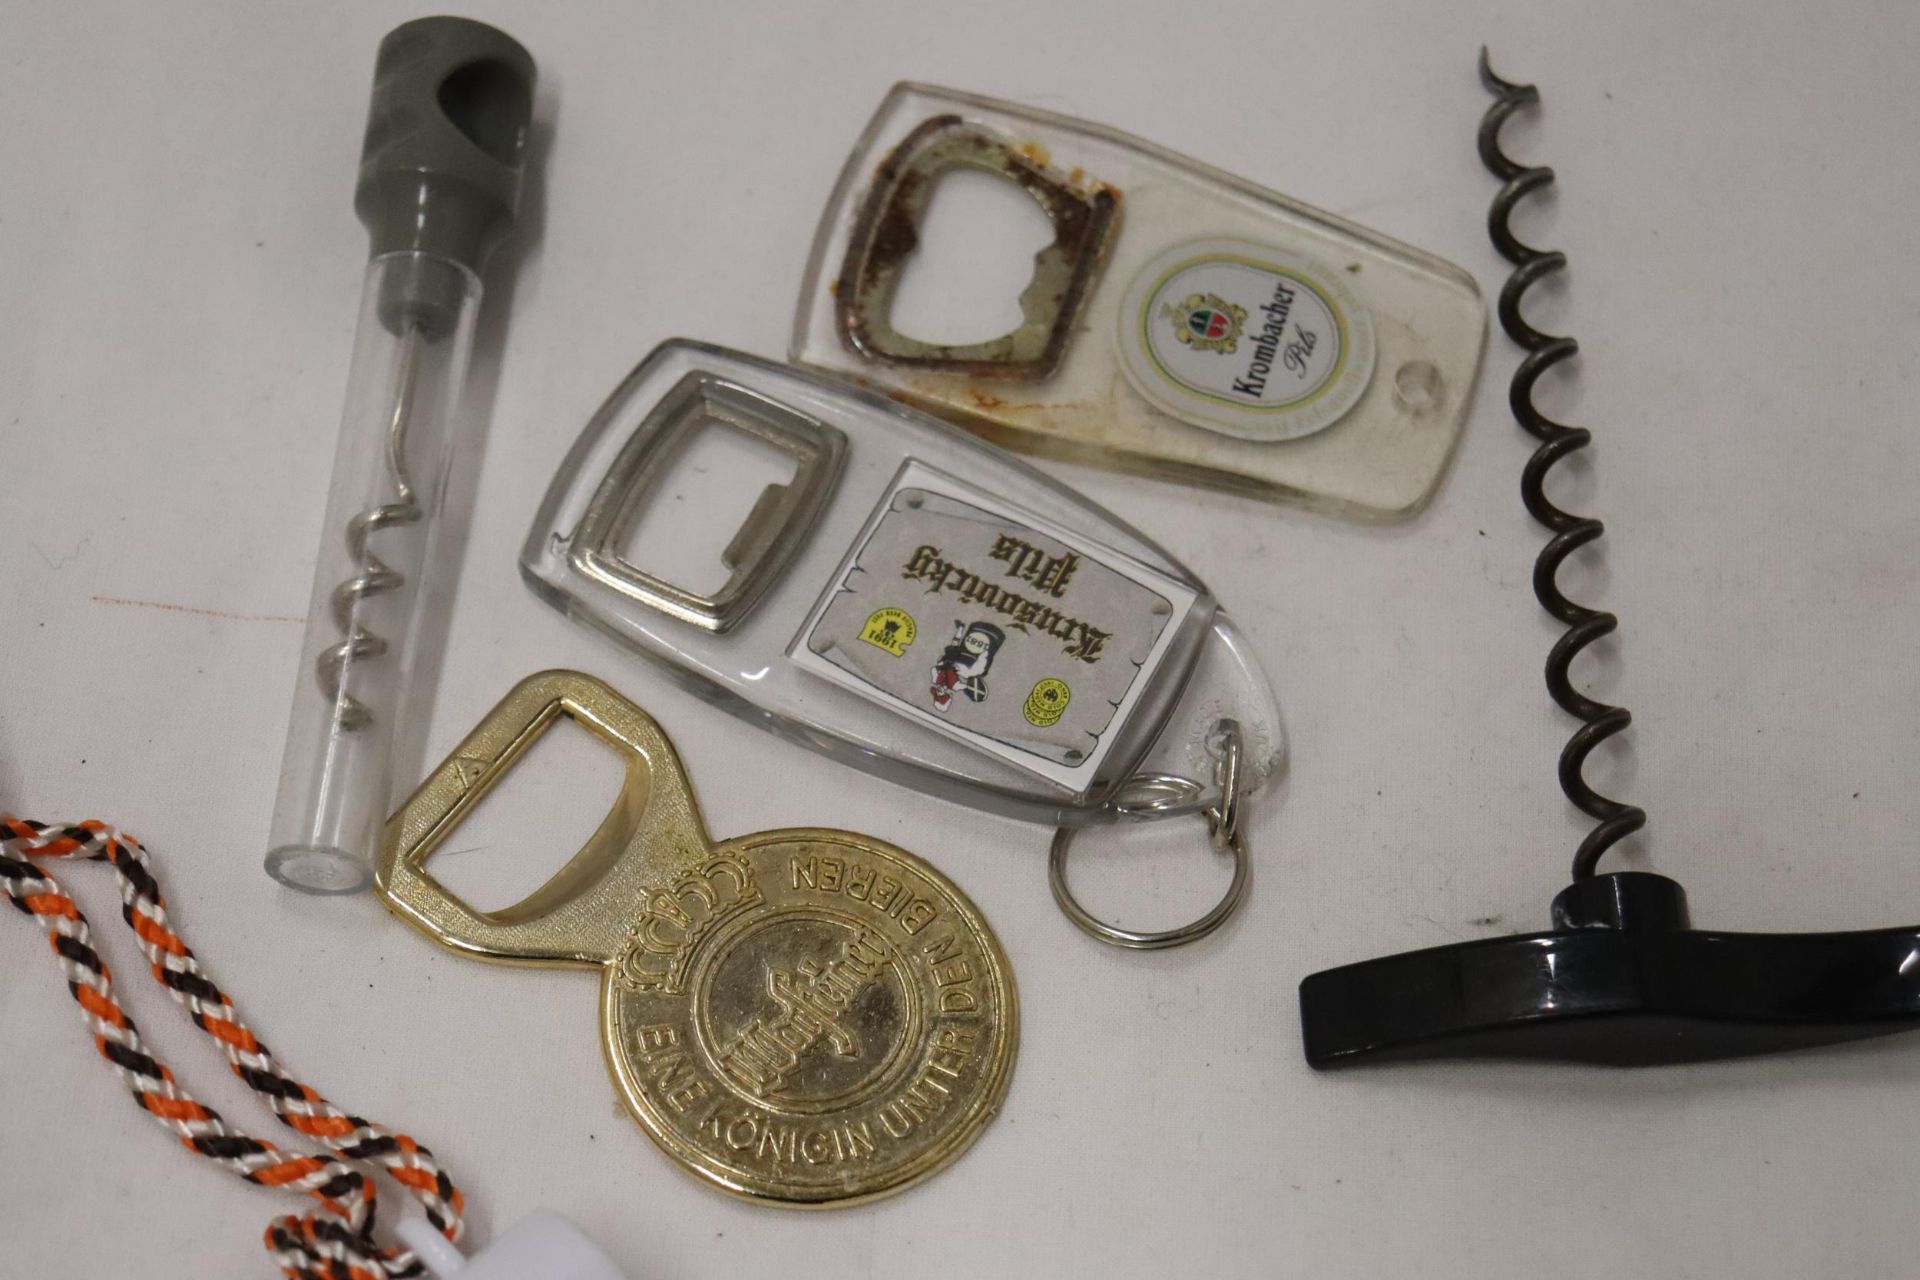 ELEVEN PIECES OF BREWERIANA TO INCLUDE CORKSCREWS, BOTTLE OPENERS, PENS AND A WHISTLE - Image 10 of 10